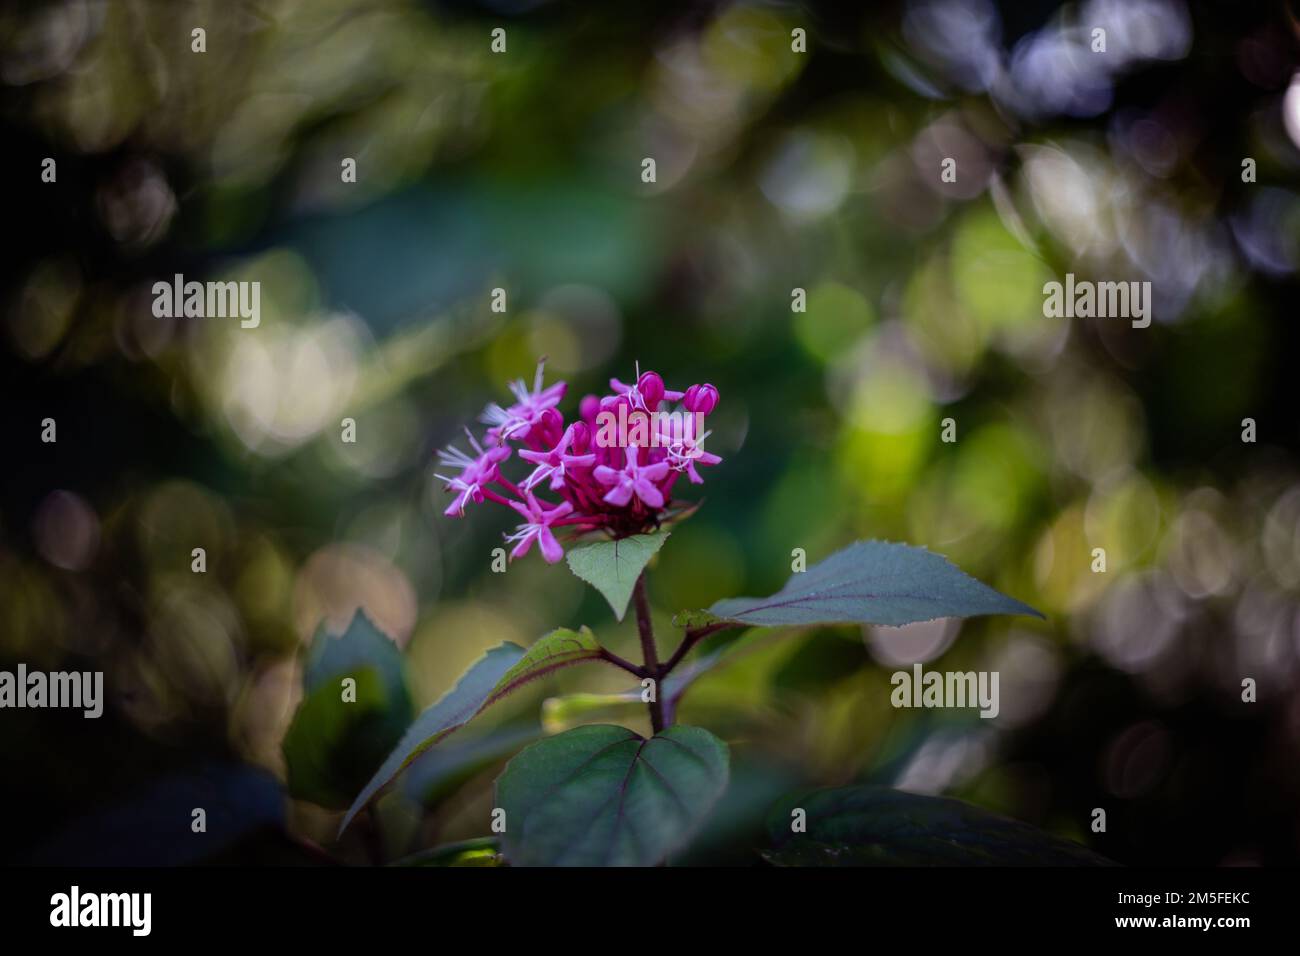 A closeup of Clerodendrum in garden with blurred background Stock Photo